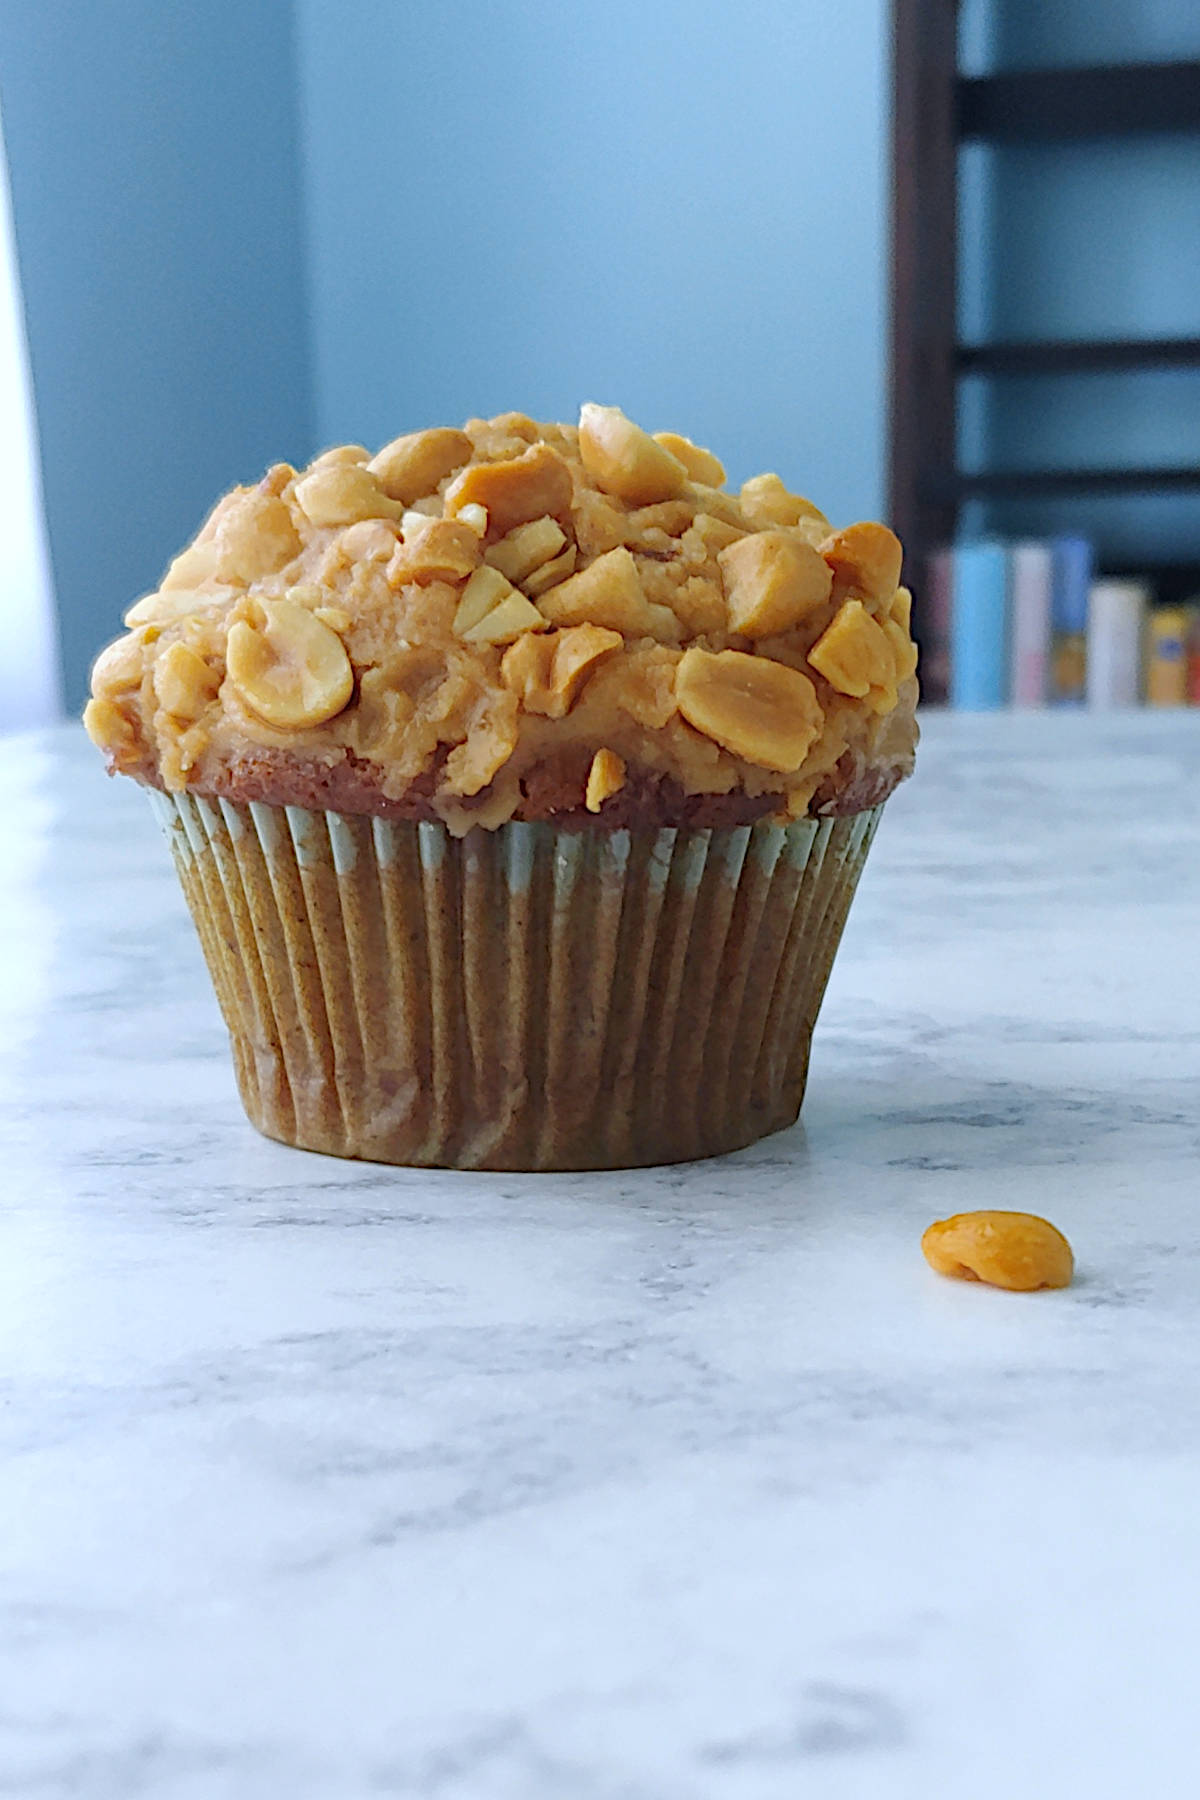 banana cupcake with peanut butter frosting, in front of a bookshelf